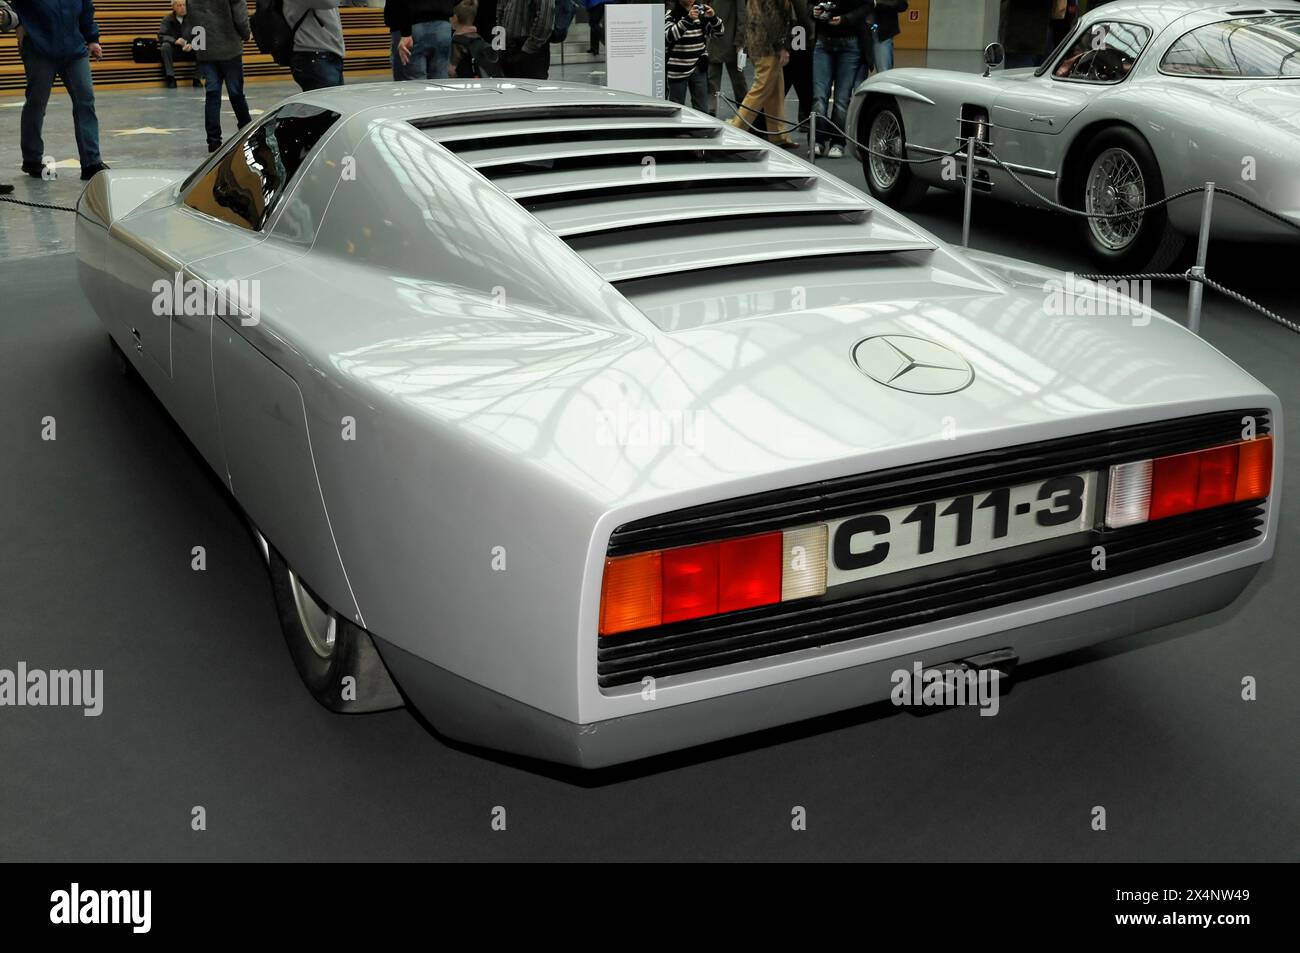 A white Mercedes-Benz concept car in retro style is shown in a car dealership, Stuttgart Messe, Stuttgart, Baden-Wuerttemberg, Germany Stock Photo